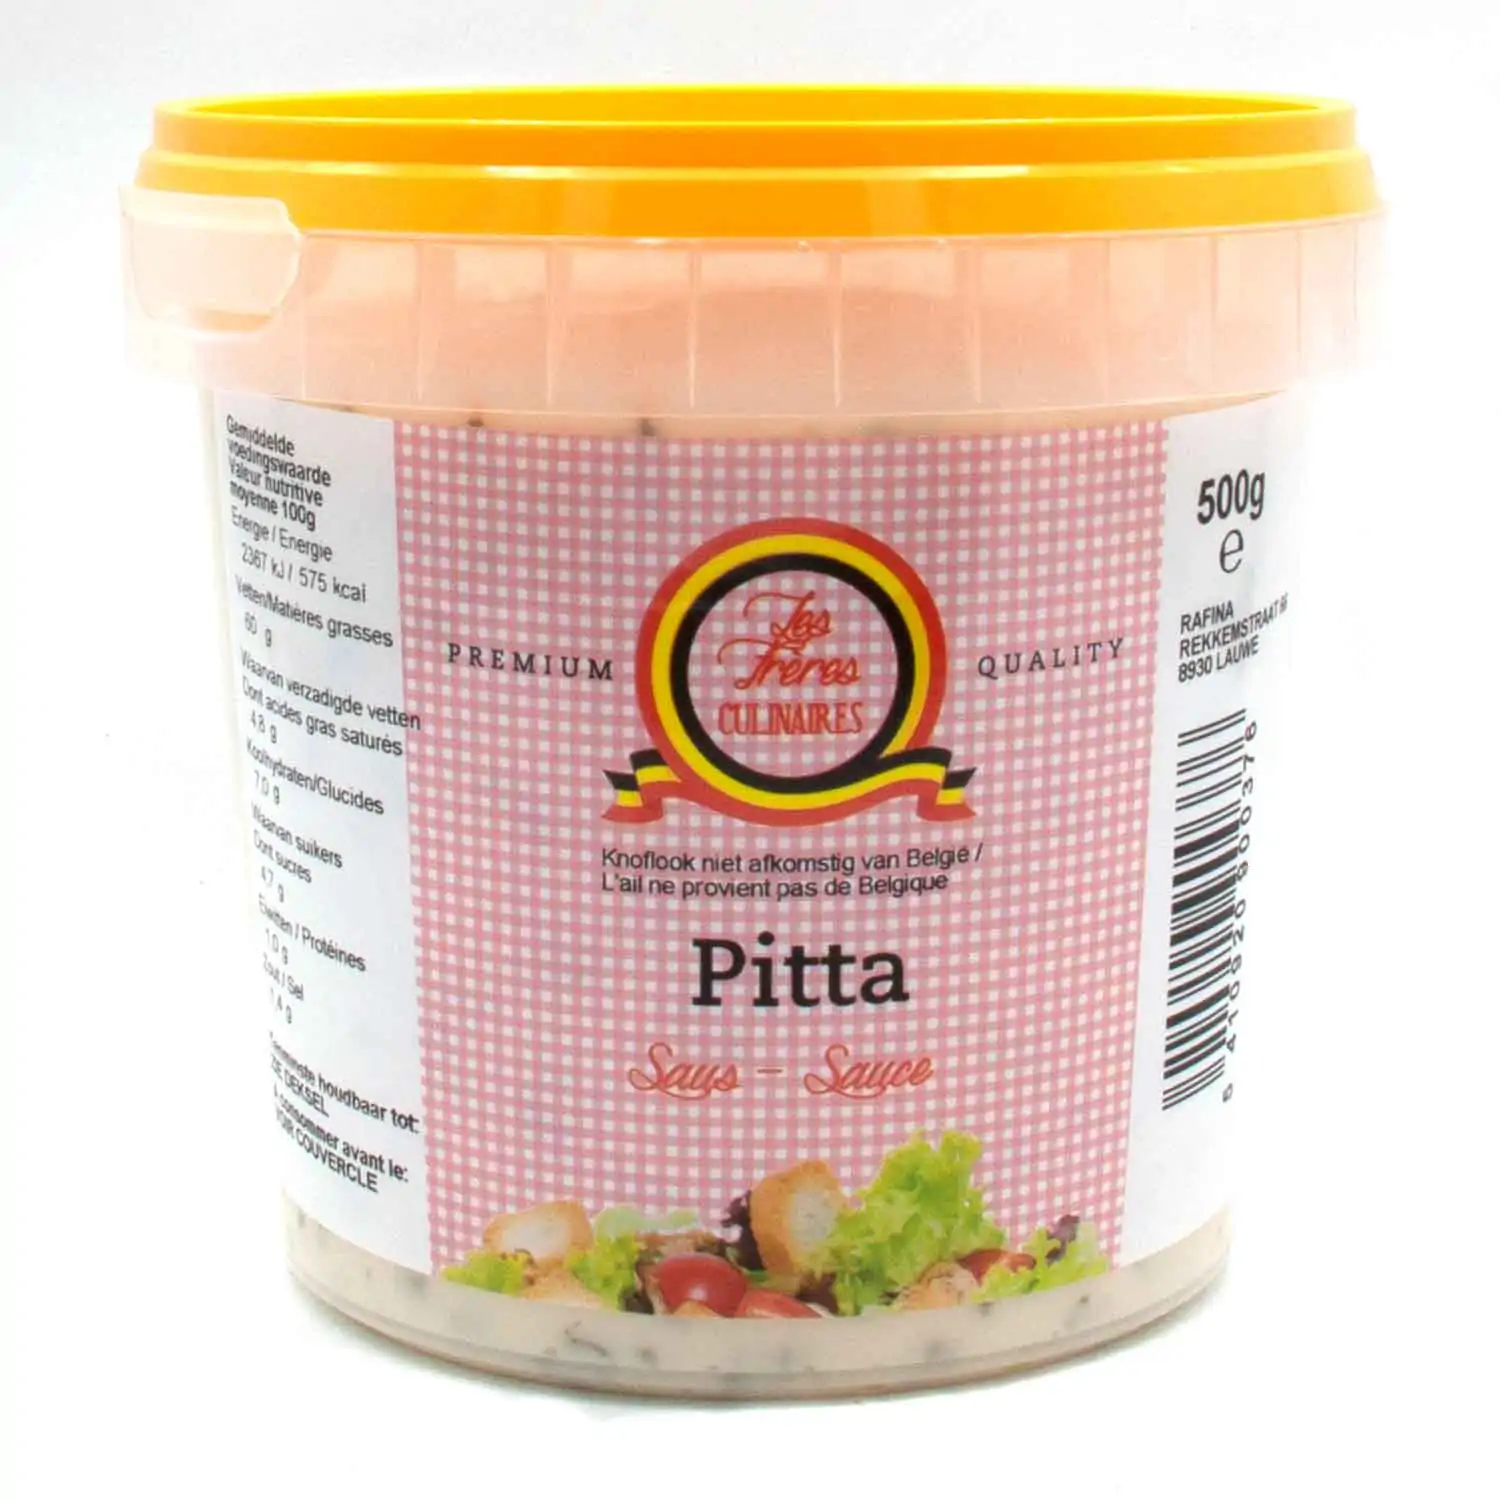 Les Frères Culinaires pitta 500g